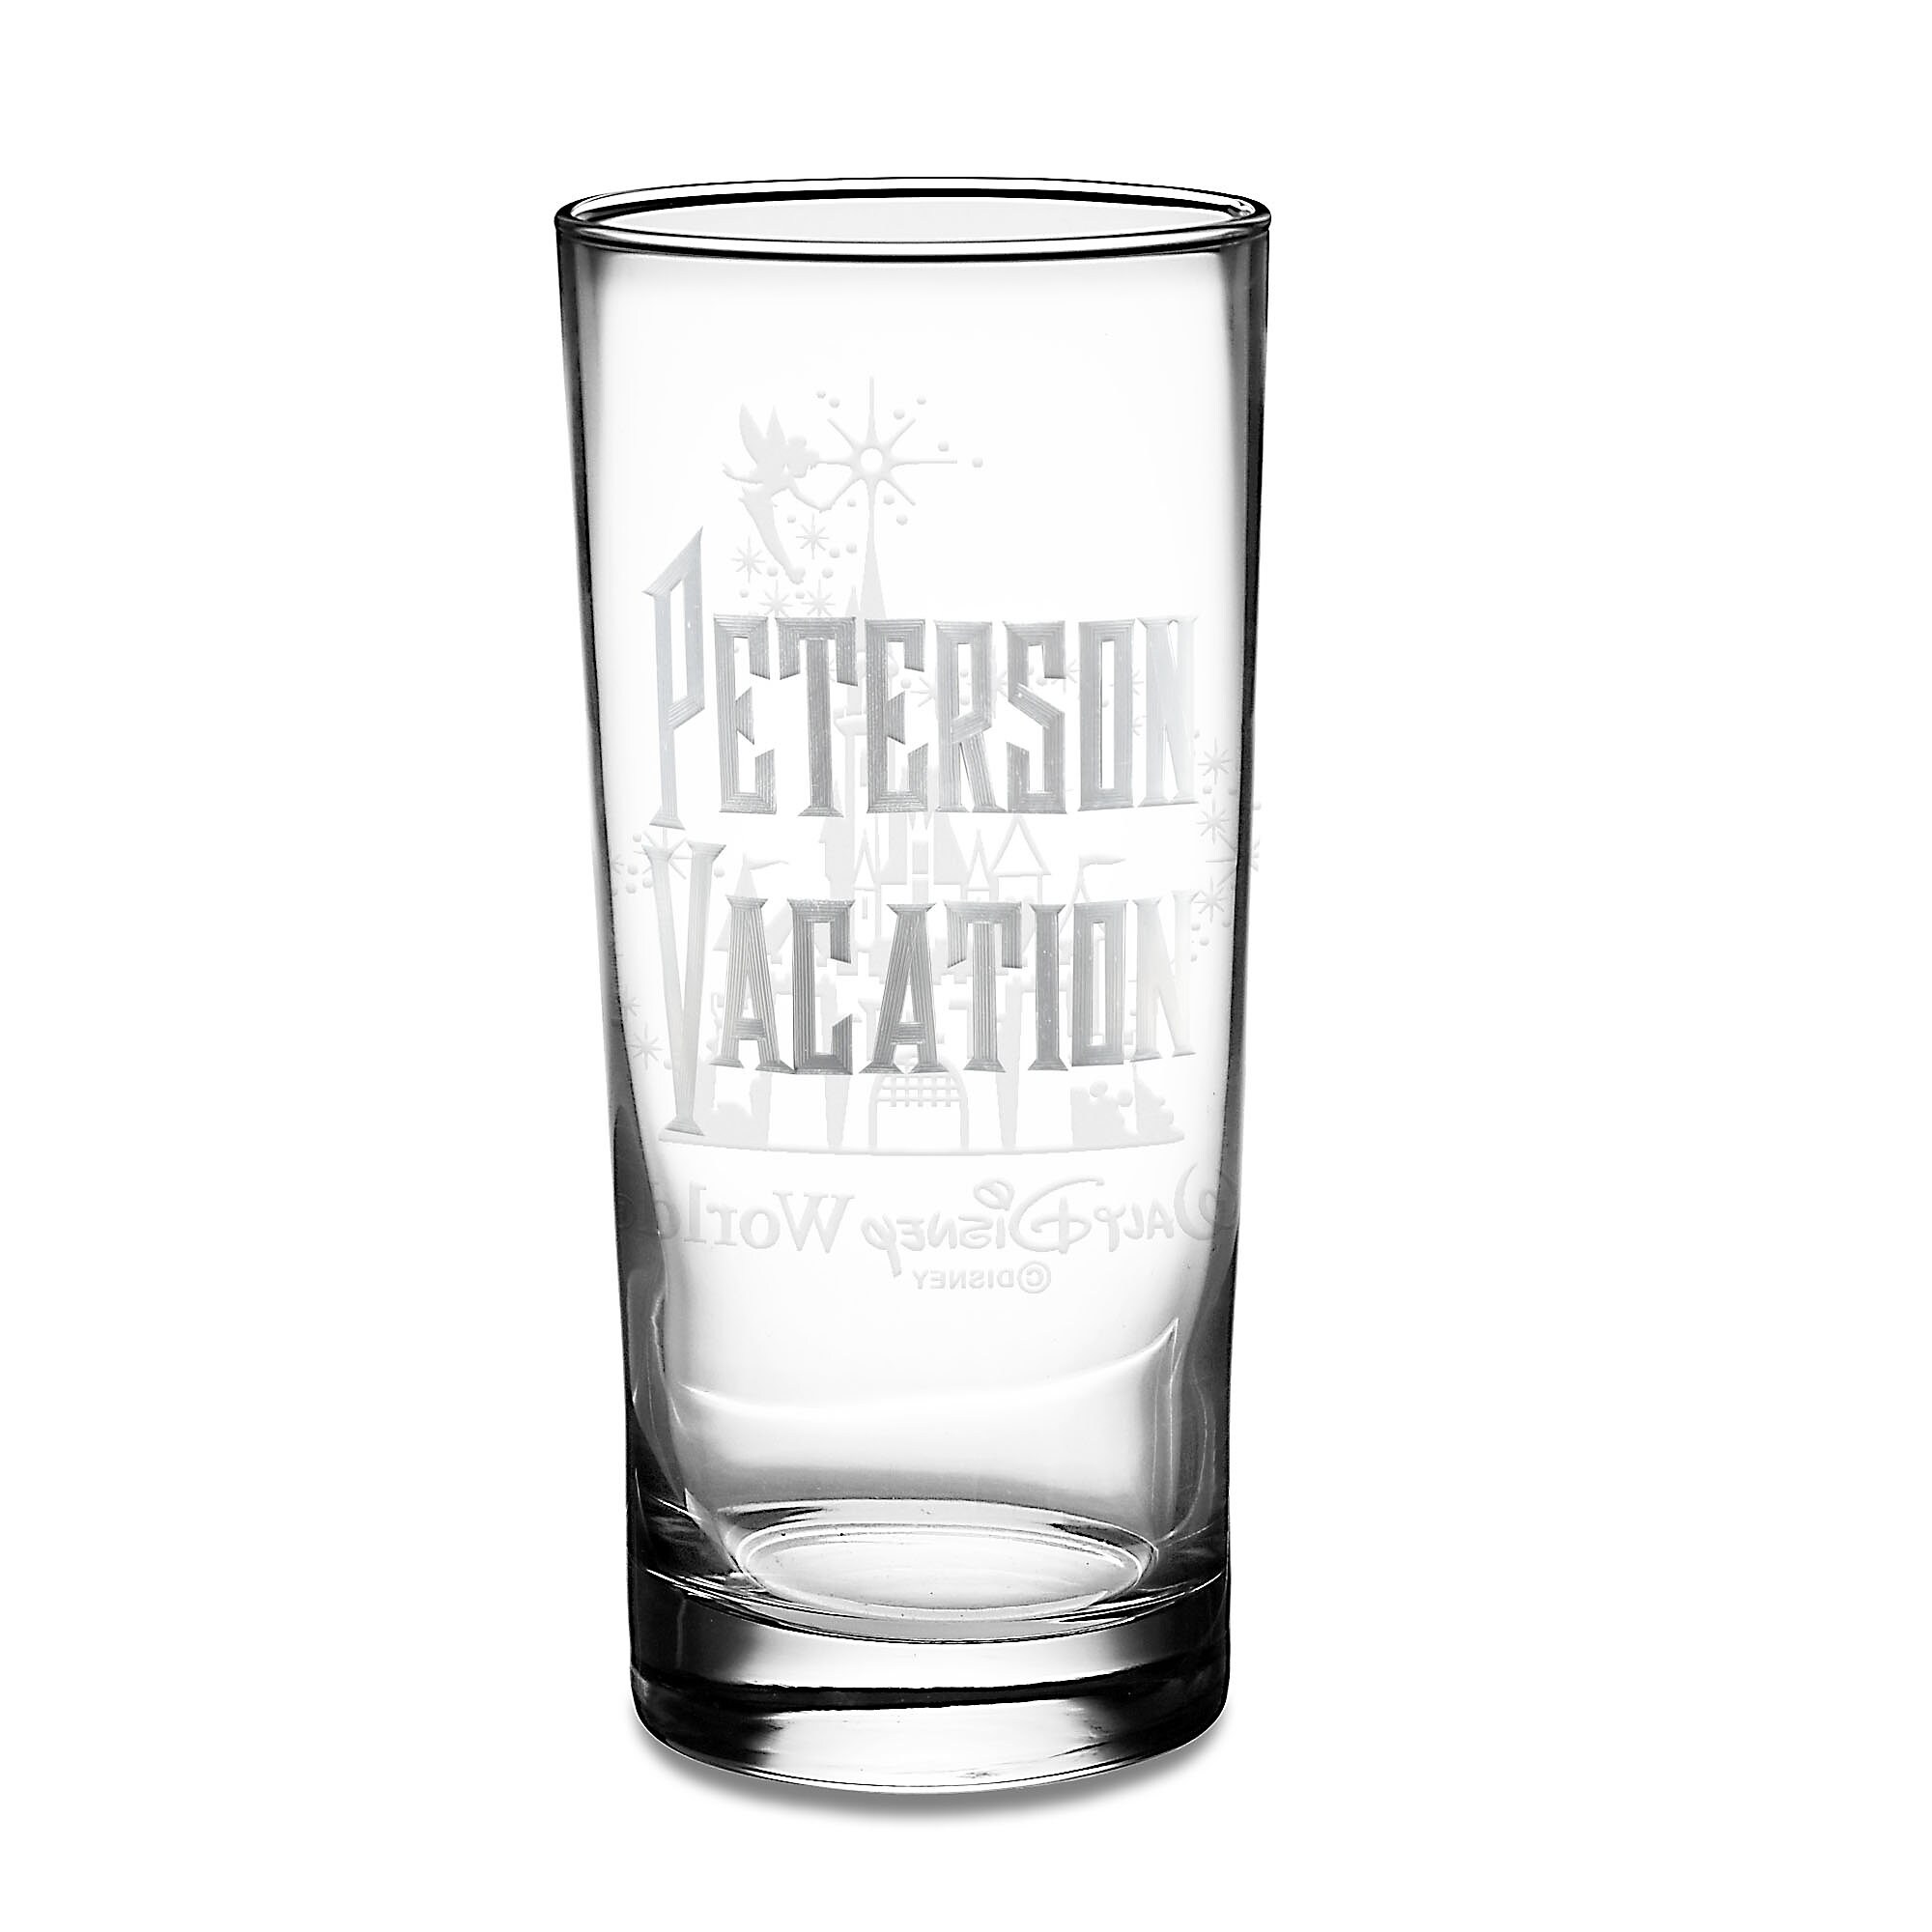 Walt Disney World Castle and Tinker Bell Glass Tumbler by Arribas - Personalizable